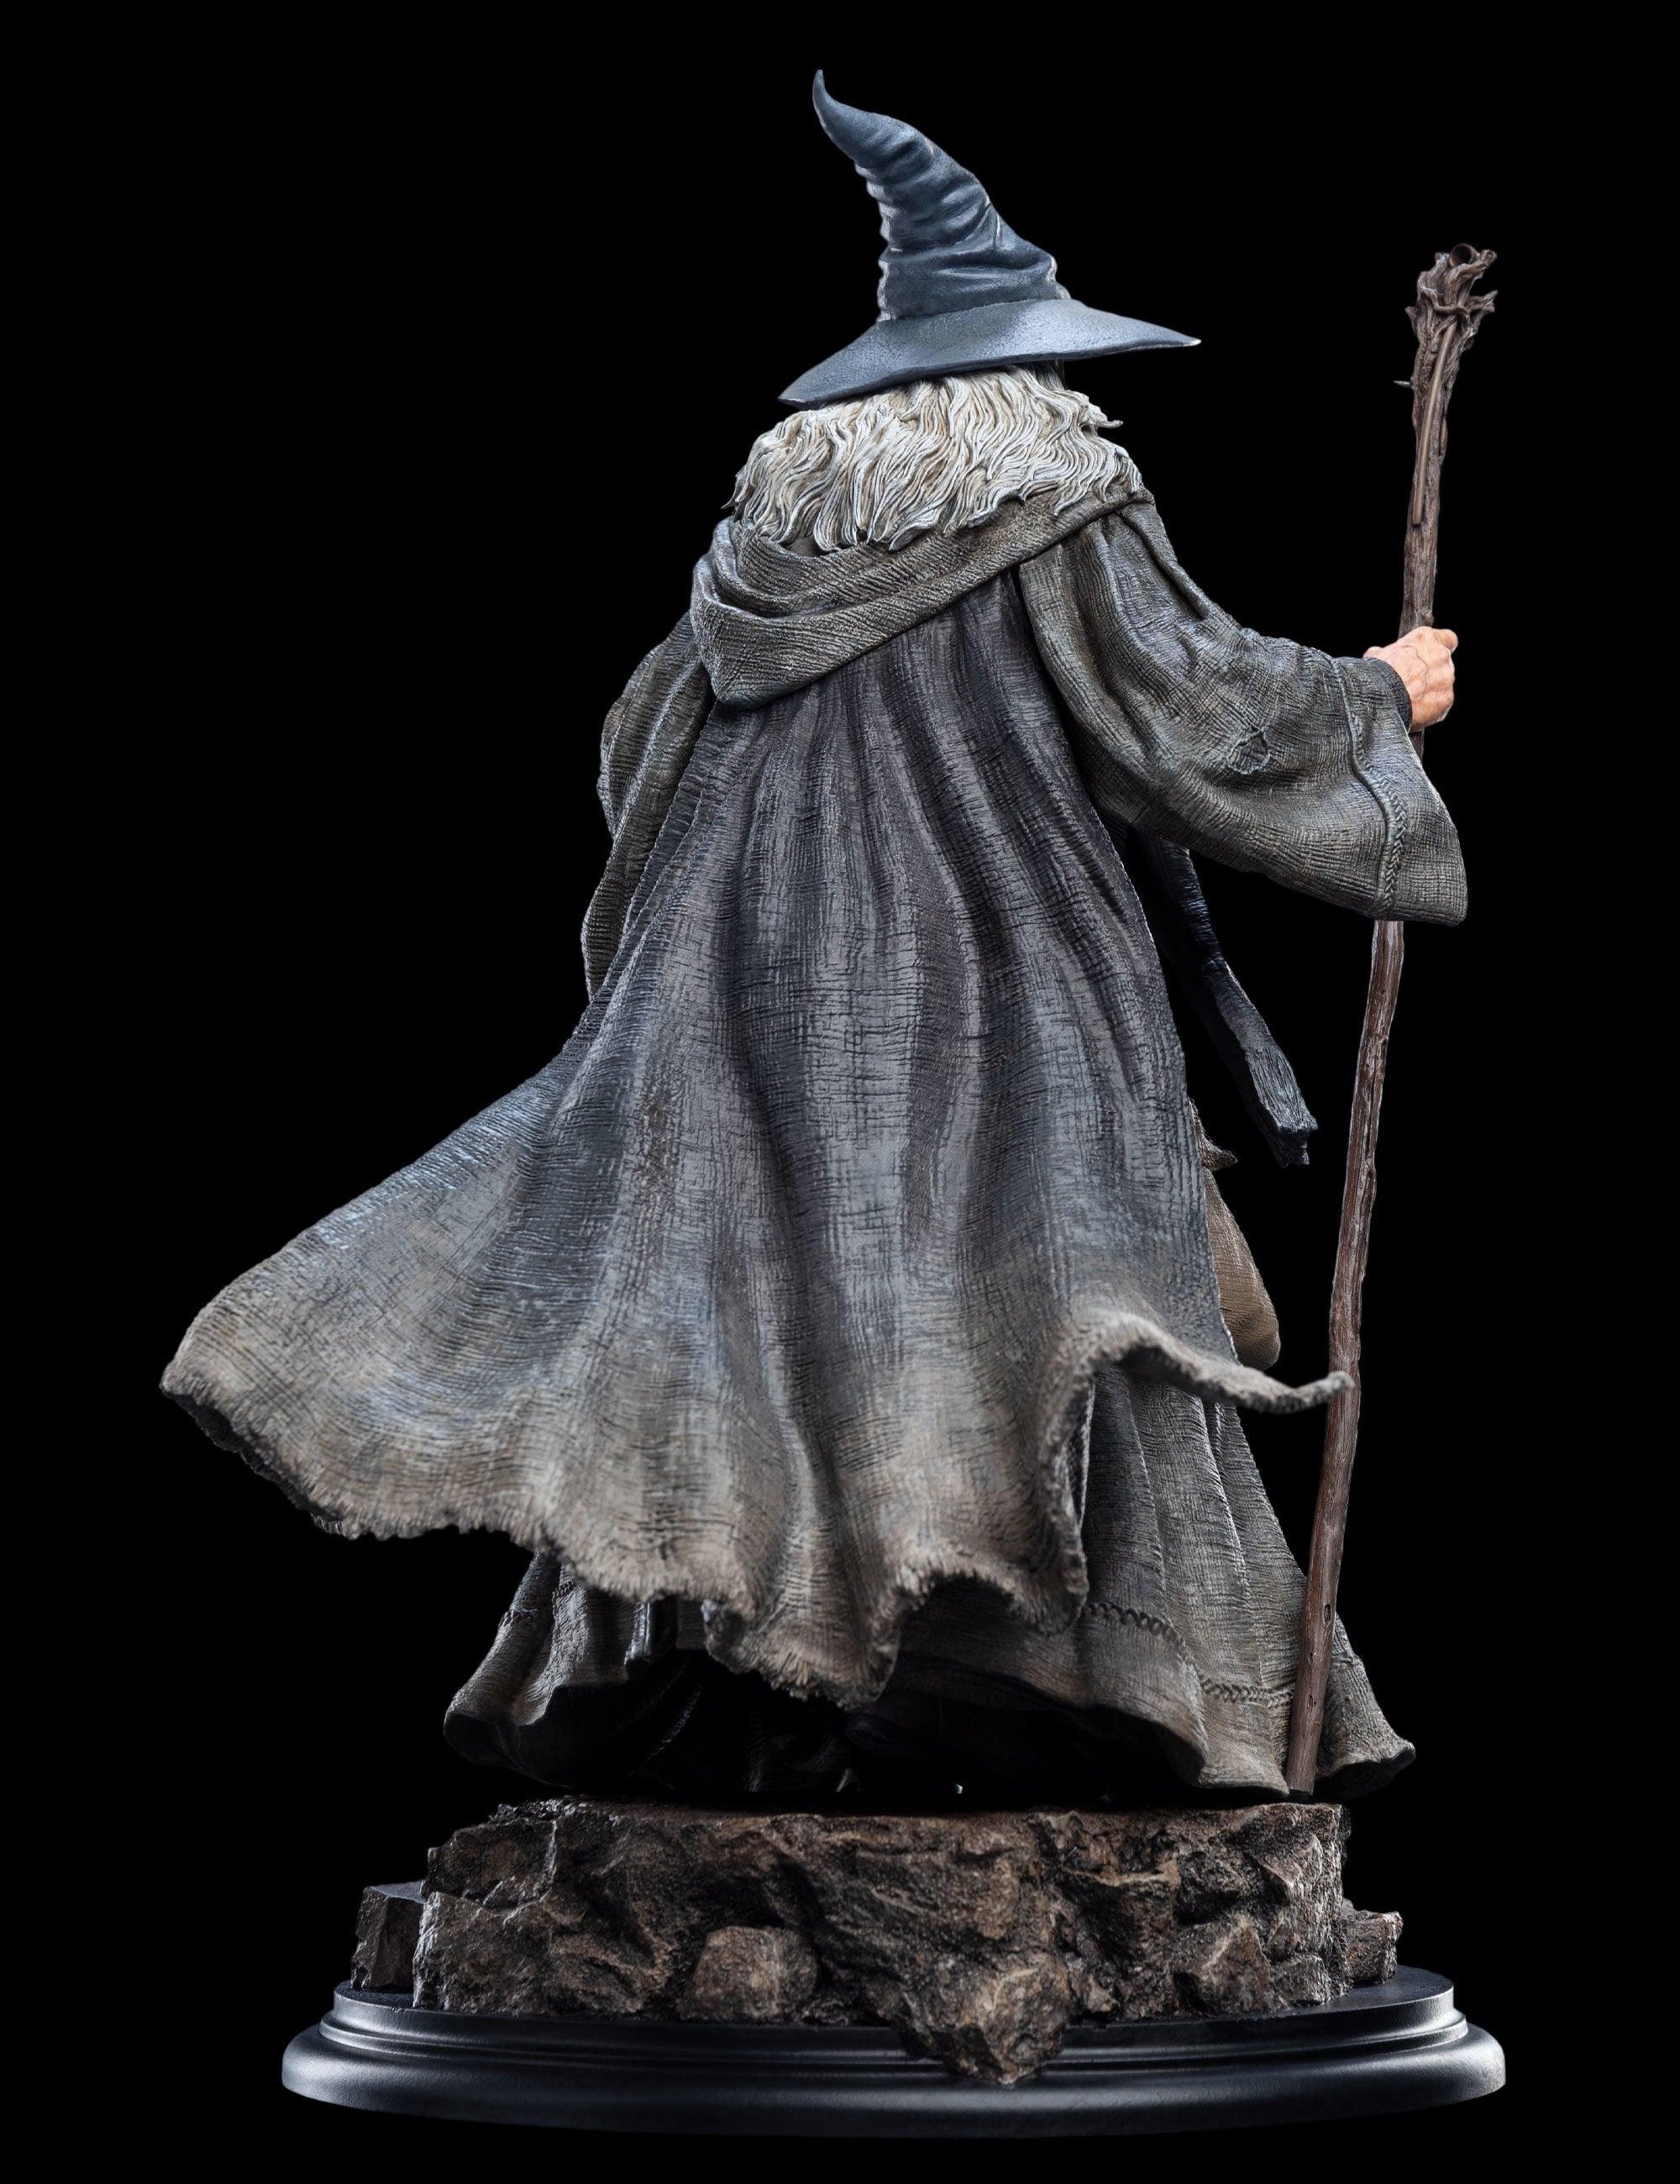 WET02981 The Lord of the Rings - Gandalf the Grey, Pilgrim 1:6 Scale Statue - Weta Workshop - Titan Pop Culture